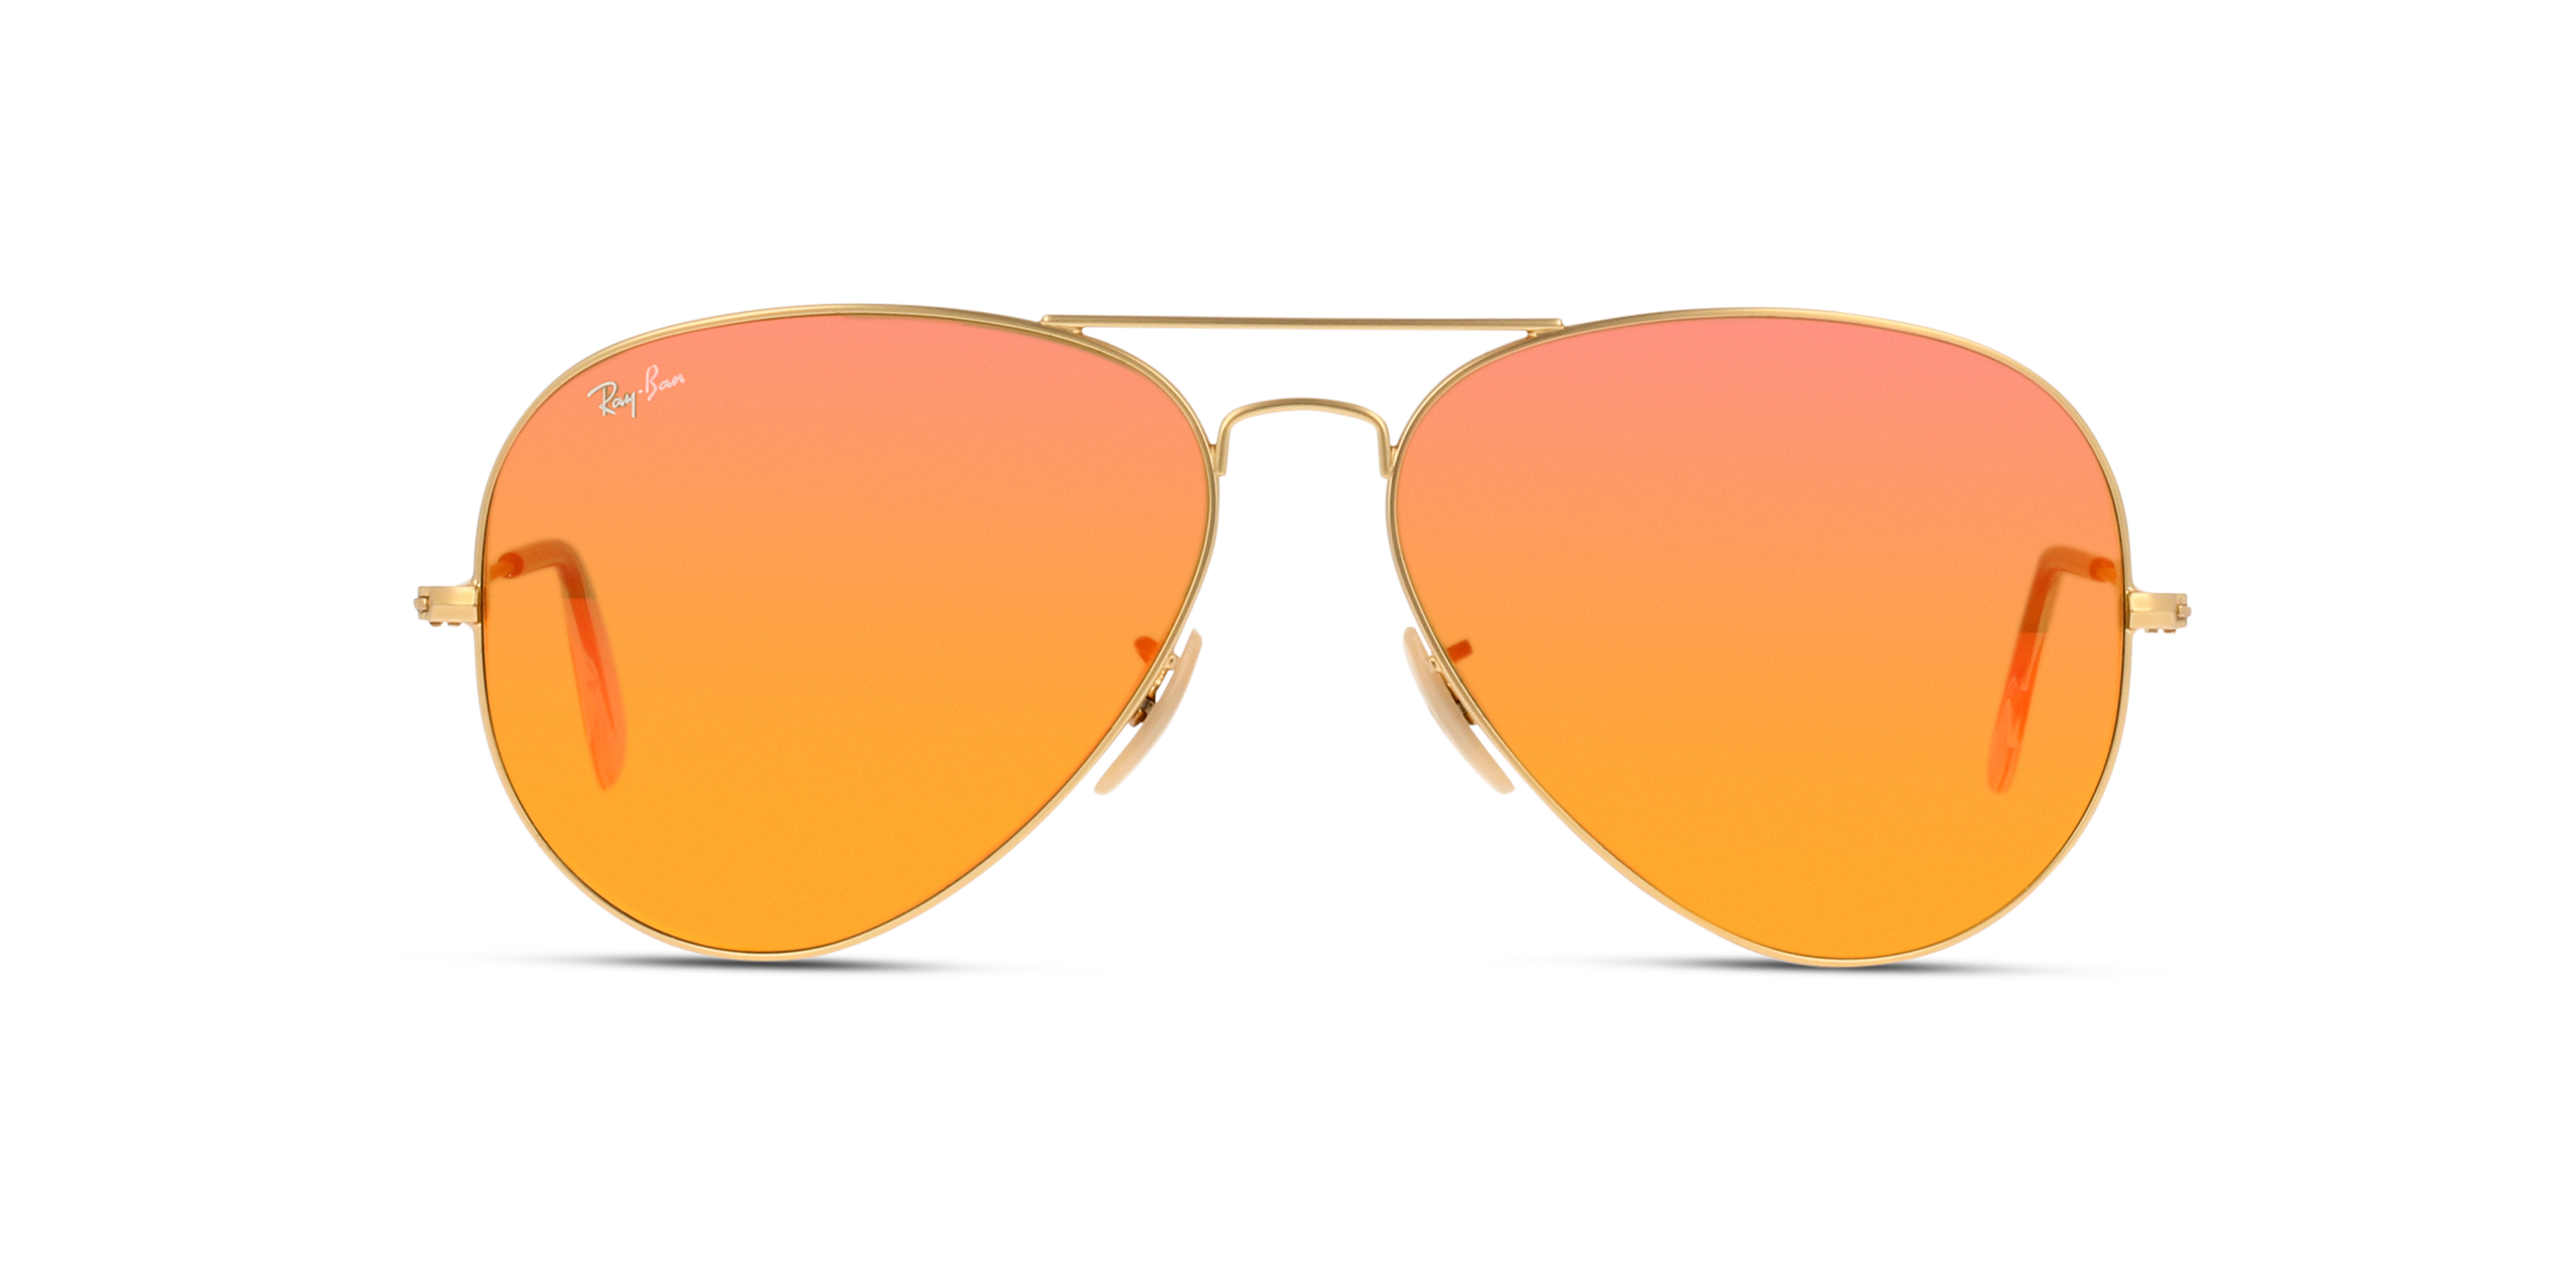 [products.image.front] Ray-Ban Aviator Flash Lenses RB3025 112/69